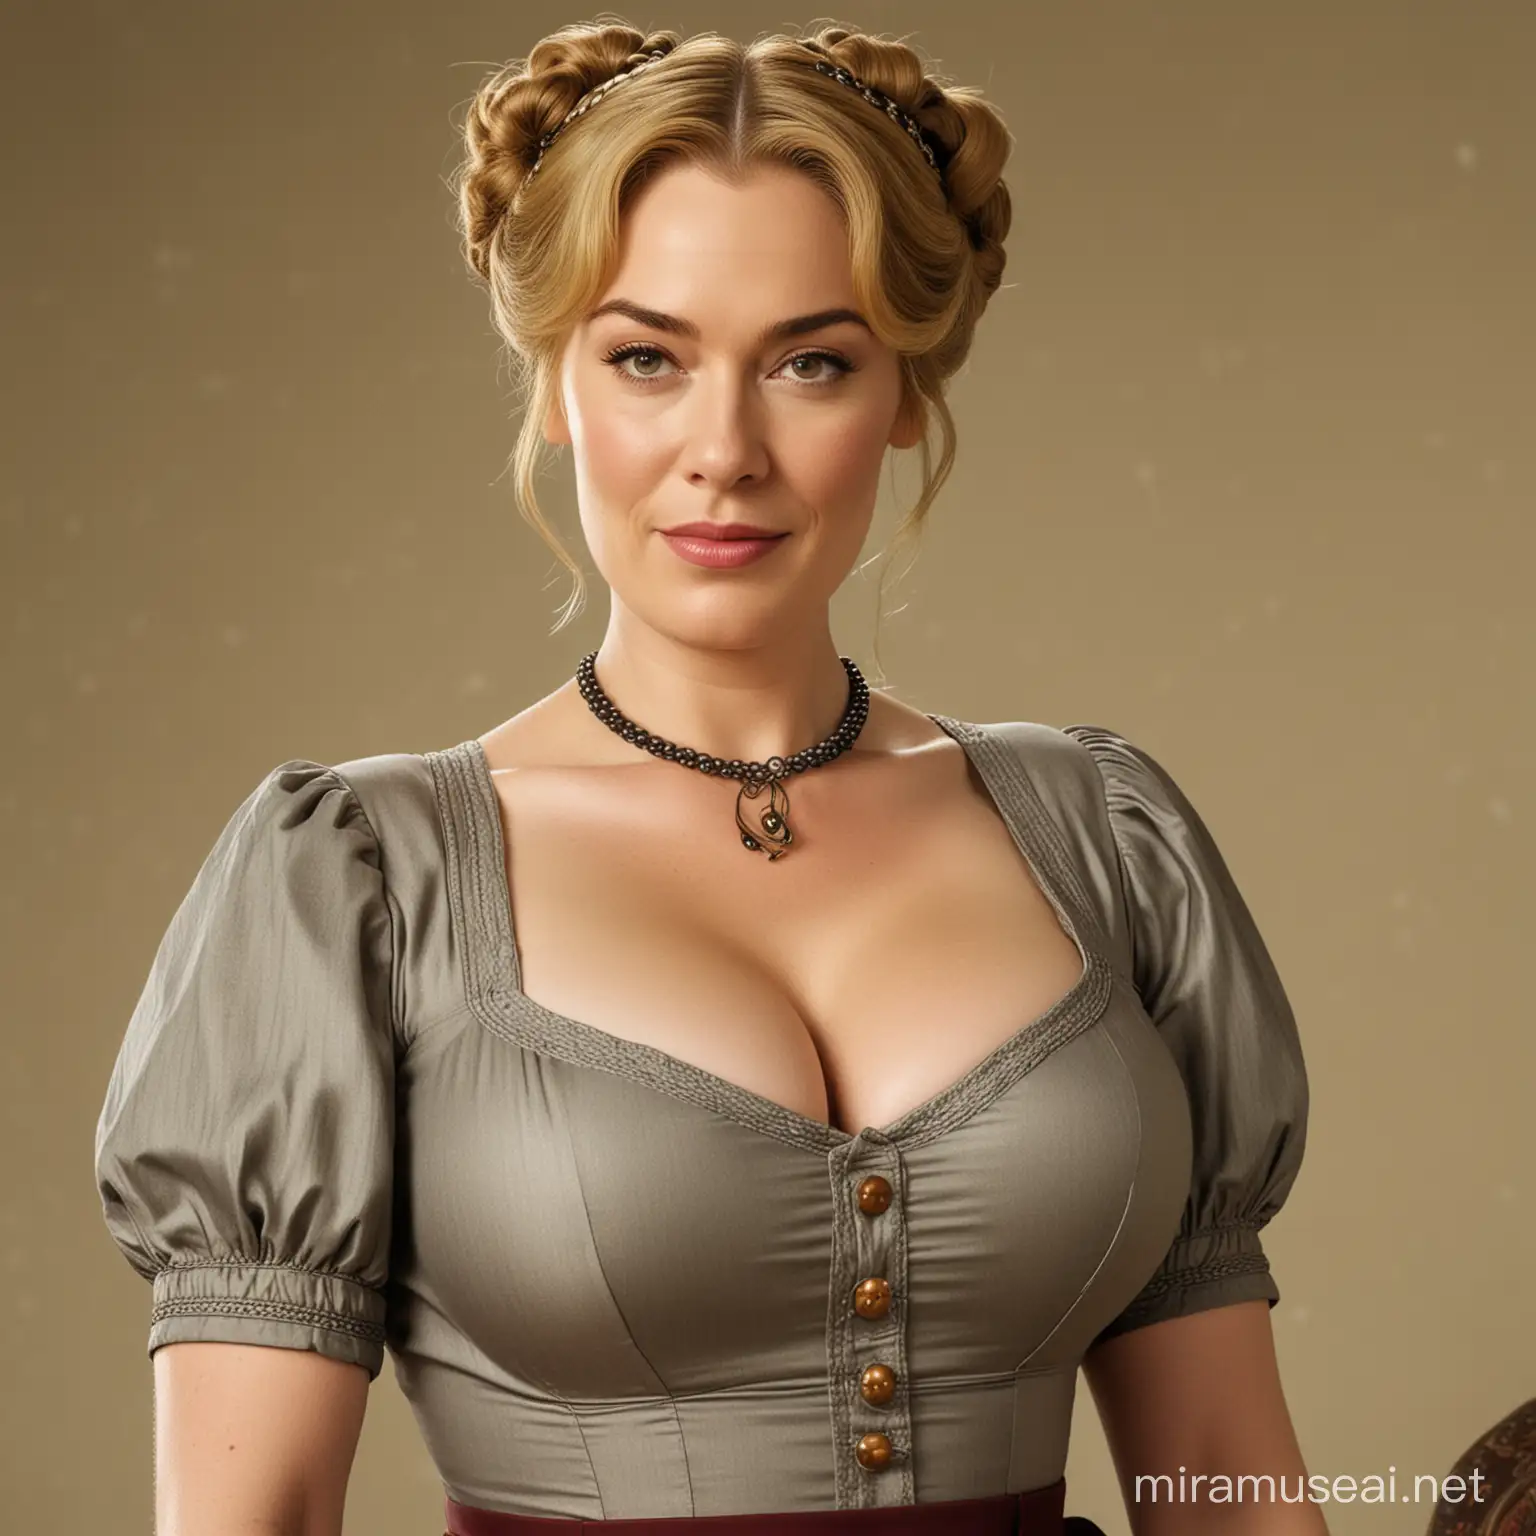 Cersei Lannister Cosplay Vintage 1940s Housewife with Bold Curves